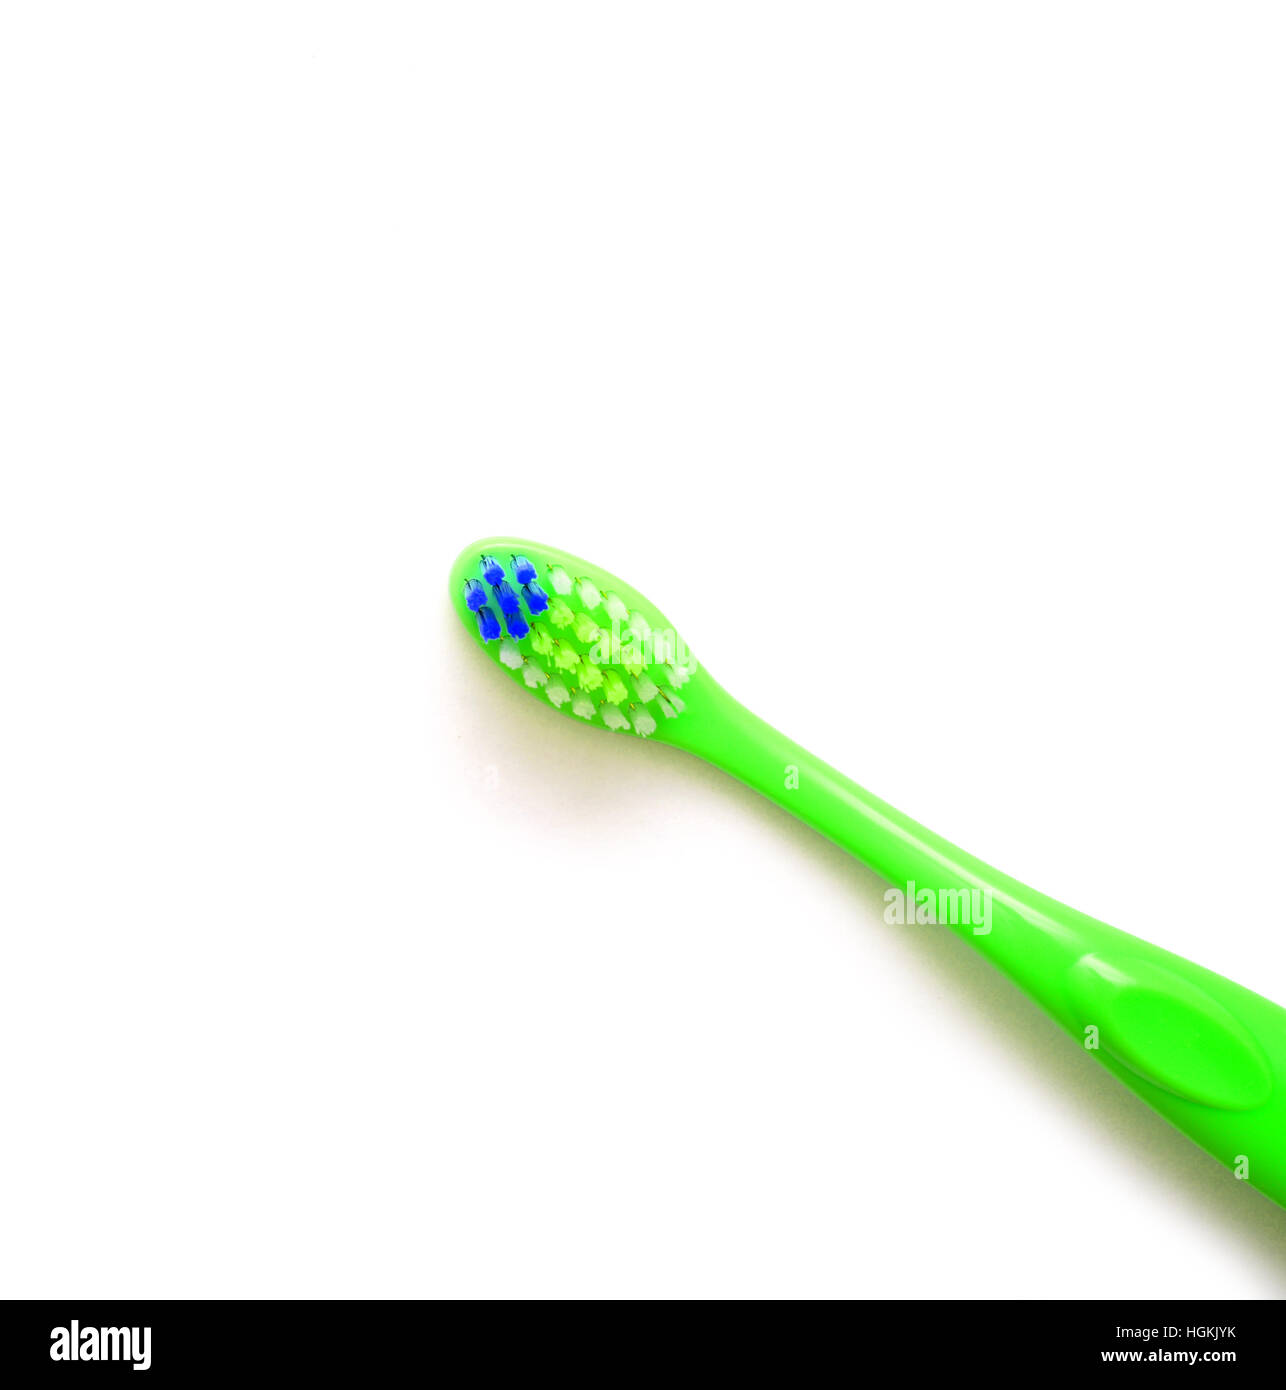 Toothbrush Drill High Resolution Stock Photography and Images - Alamy